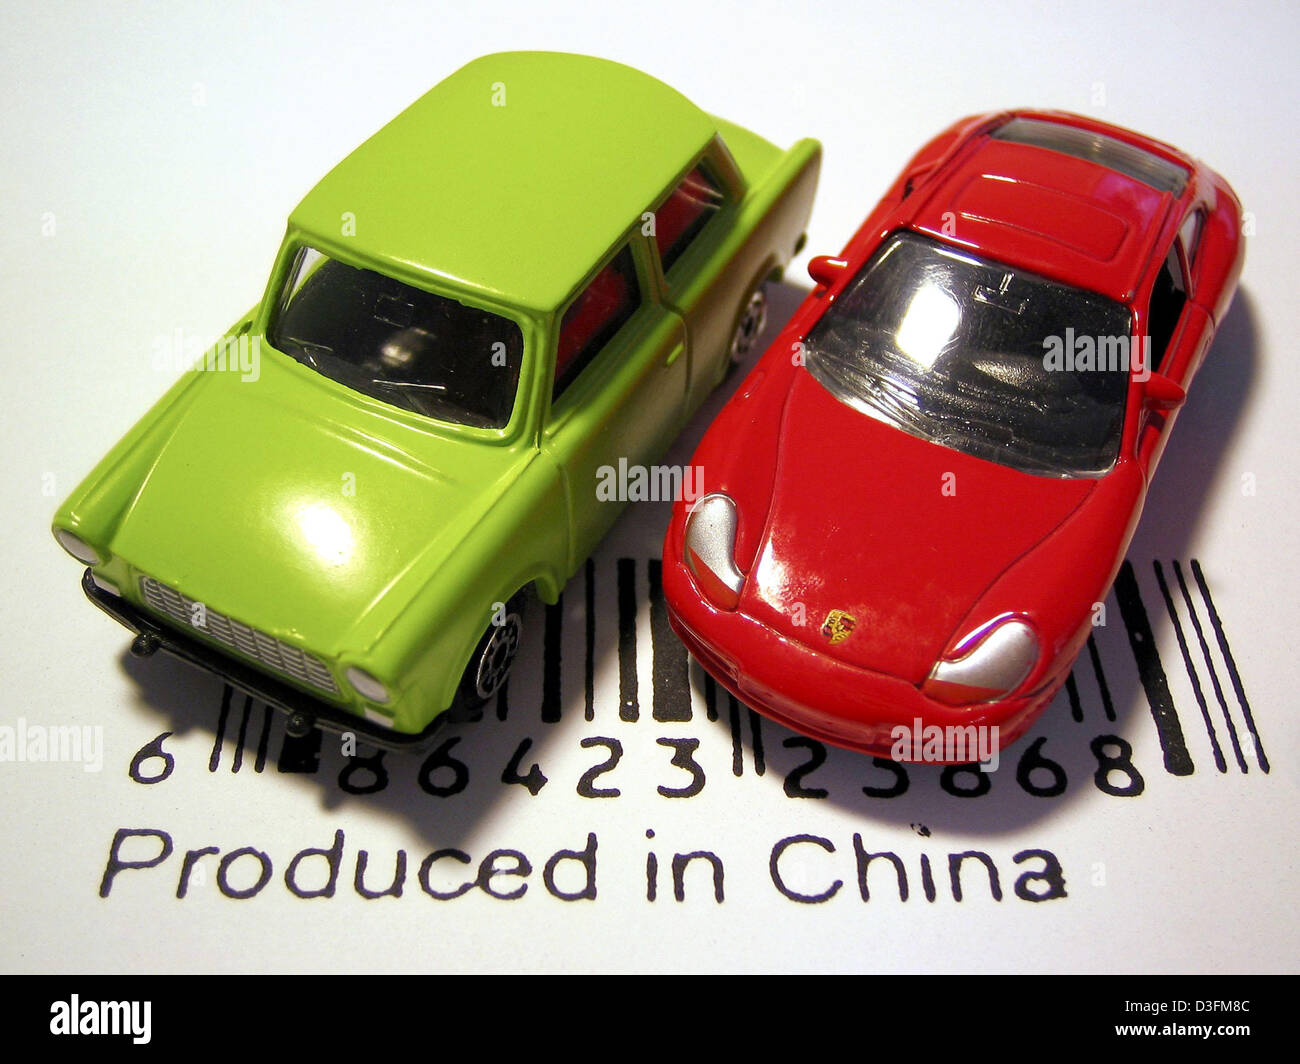 (dpa) - A green Trabant 601 car and a red Porsche Carrera 911 stand on a barcode which indicates that the toy cars were 'produced in China', in Leipzig, Germany, 9 December 2004. The Trabant, nicknamed Trabi, used to be produced in East Germany. China has a 70 per cent market share of the worldwide toy production. Stock Photo